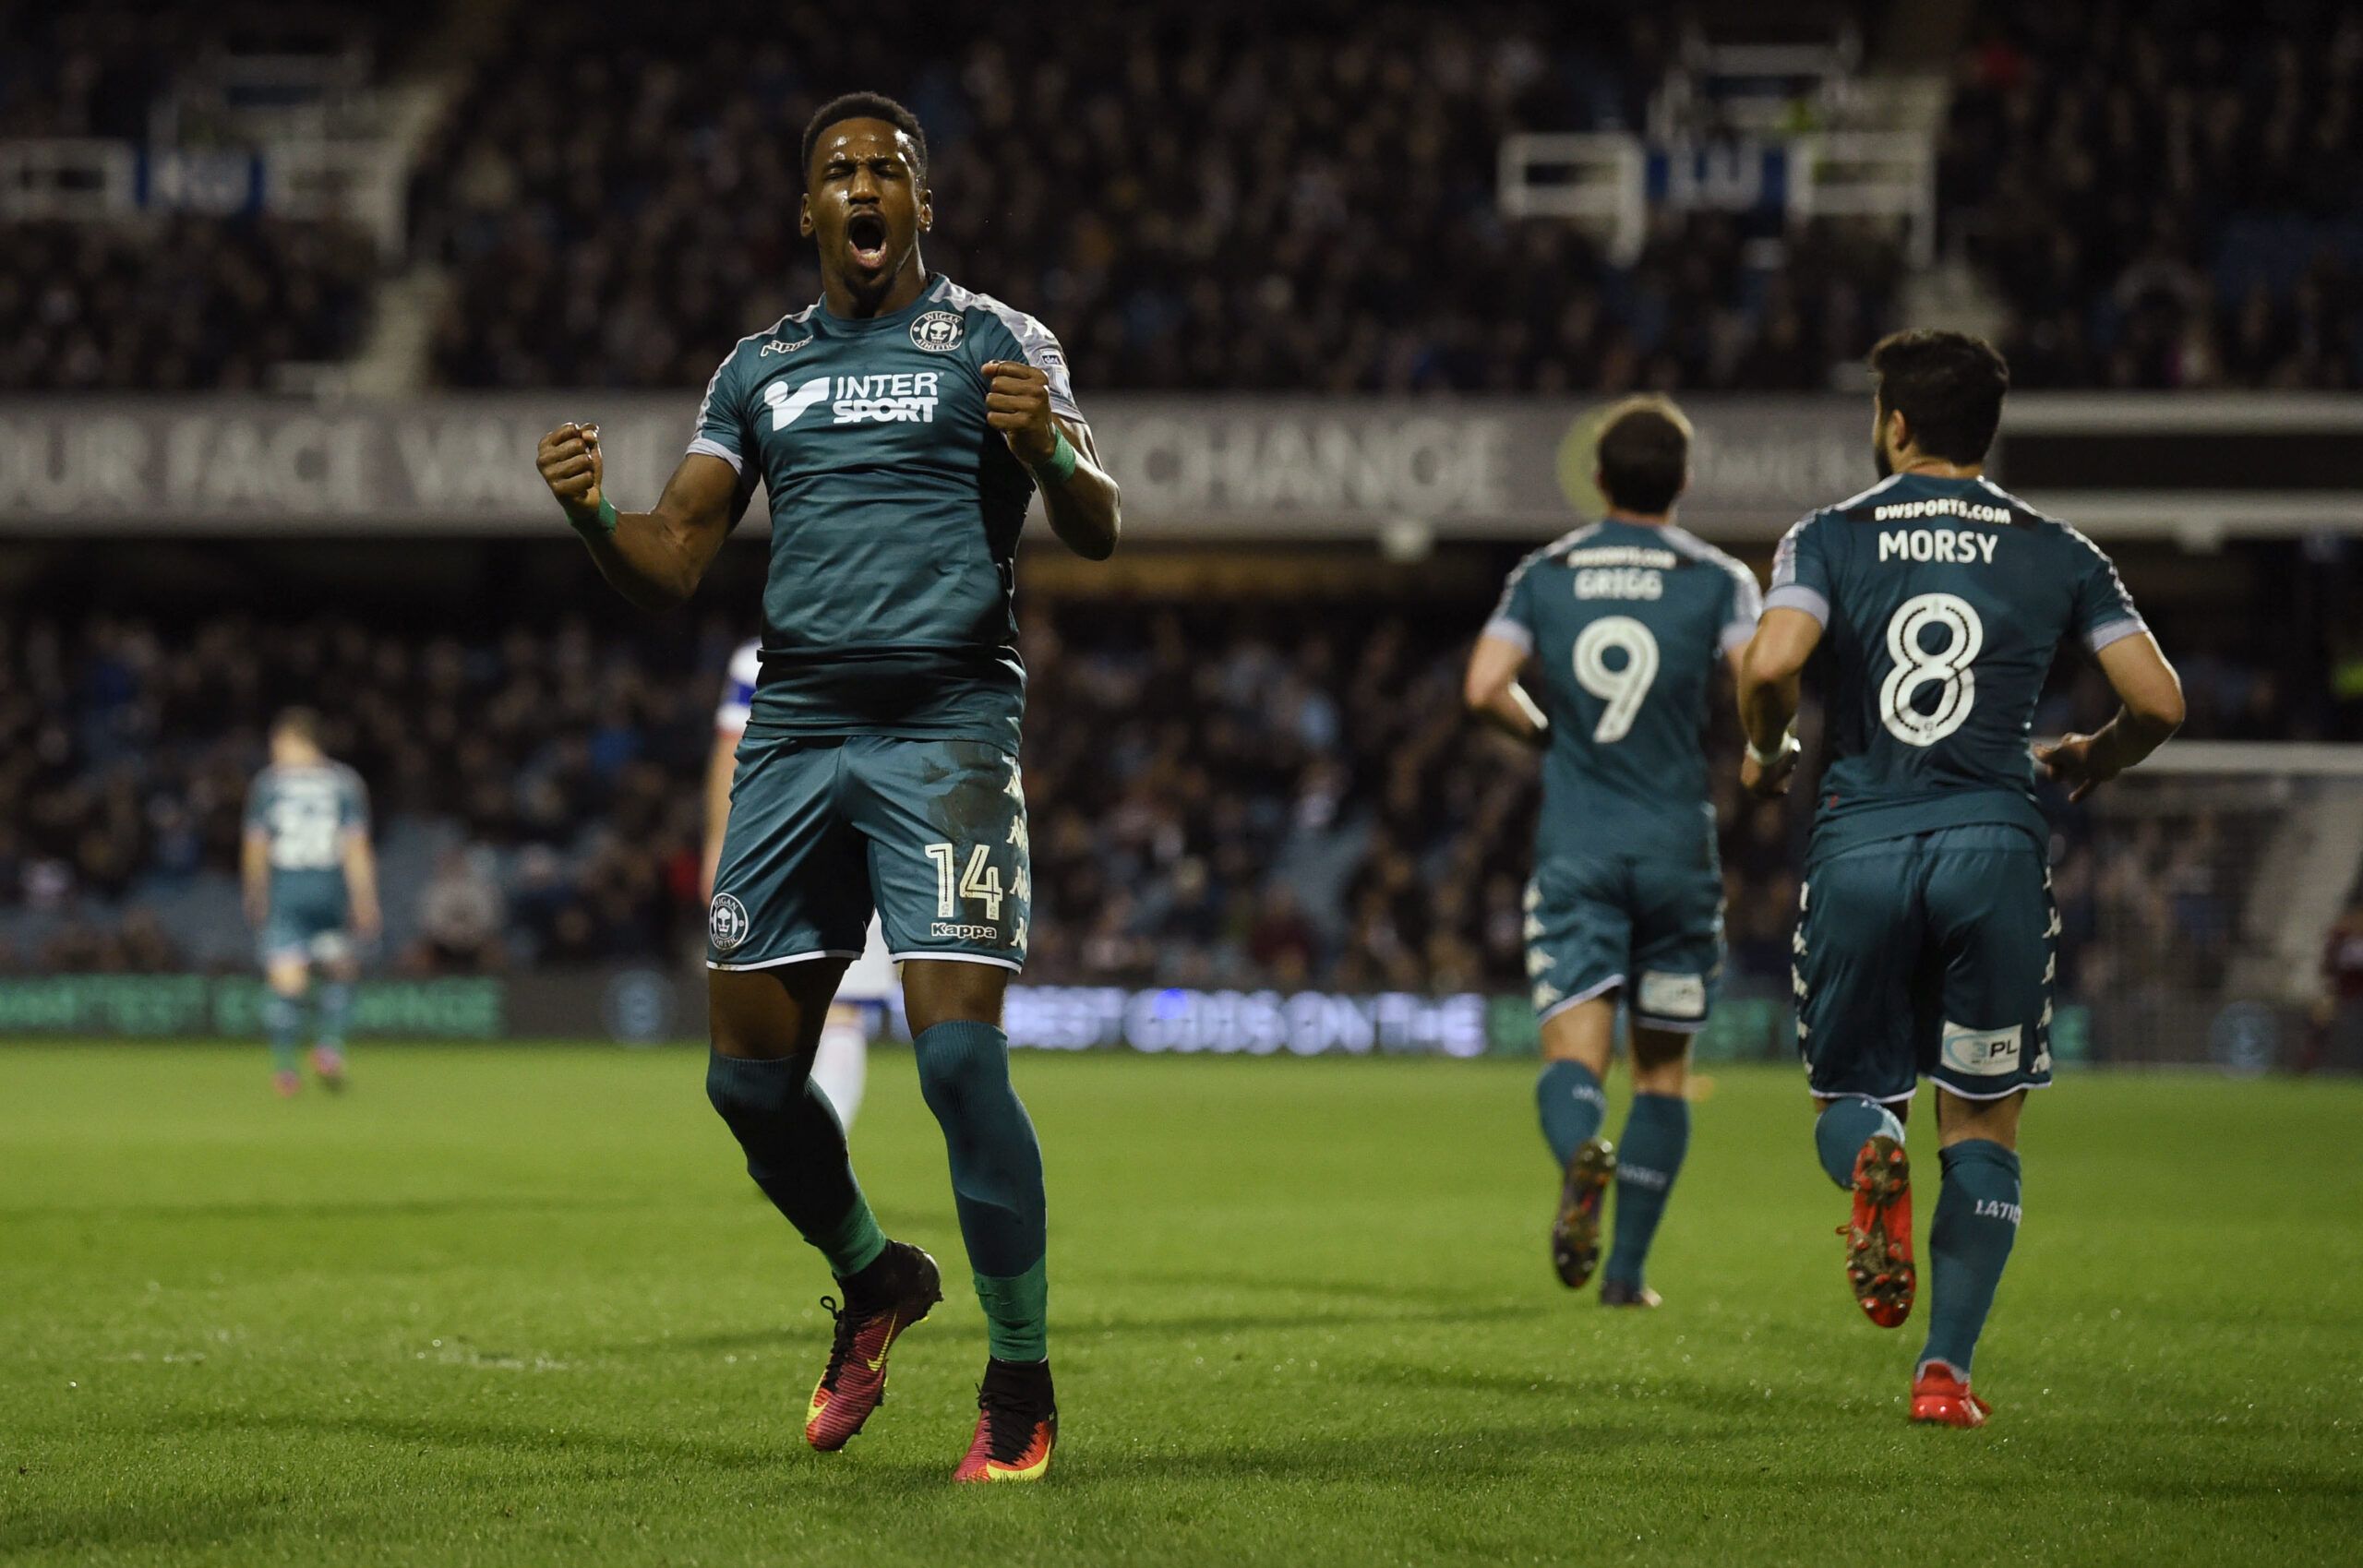 Britain Football Soccer - Queens Park Rangers v Wigan Athletic - Sky Bet Championship - Loftus Road - 21/2/17 Wigan's Omar Bogle celebrates scoring their first goal from the penalty spot  Mandatory Credit: Action Images / Tony O'Brien Livepic EDITORIAL USE ONLY. No use with unauthorized audio, video, data, fixture lists, club/league logos or 